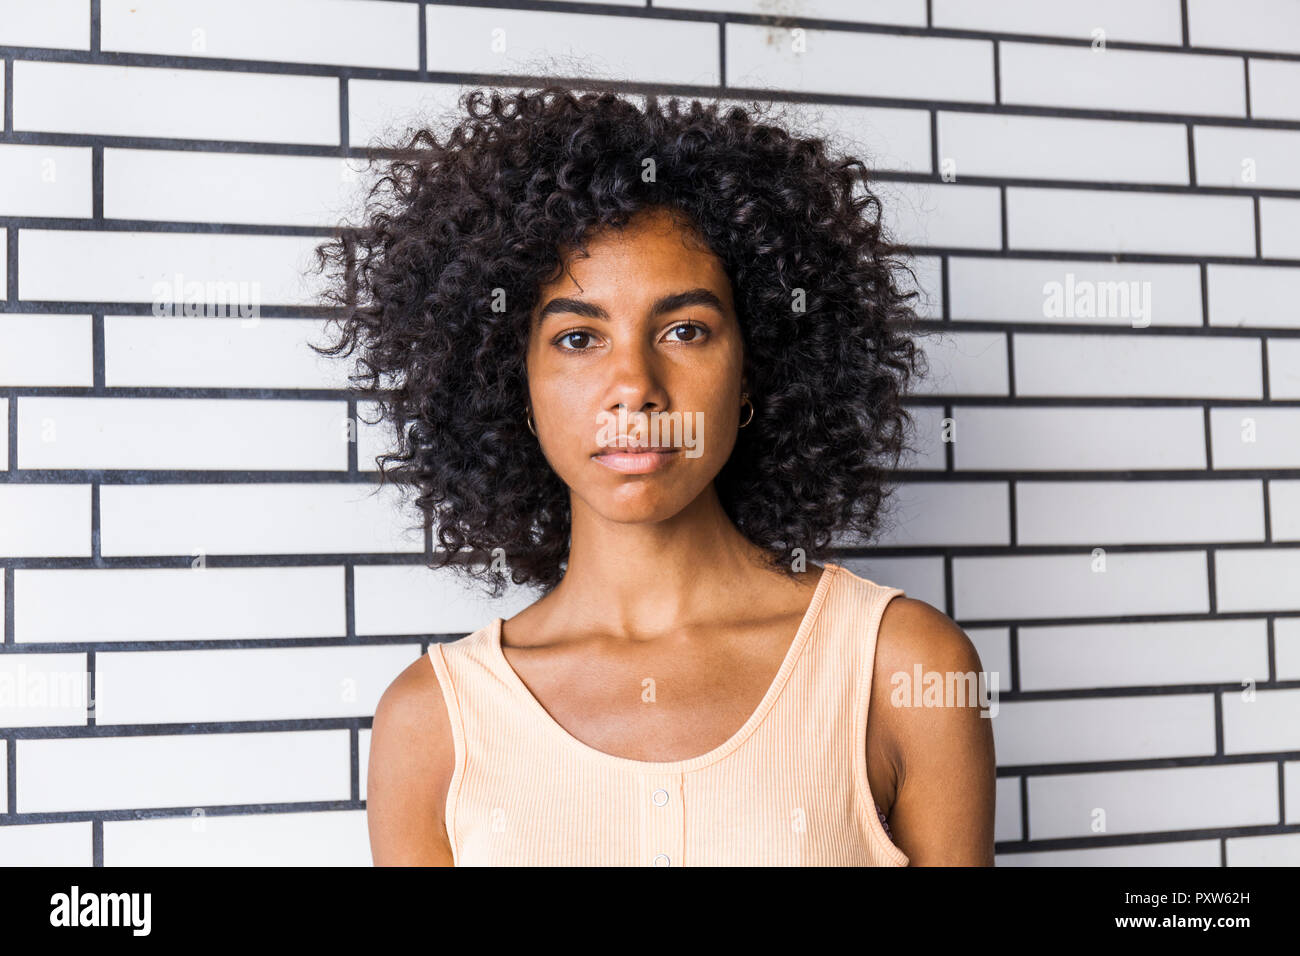 Portrait of serious young woman with curly hair Stock Photo